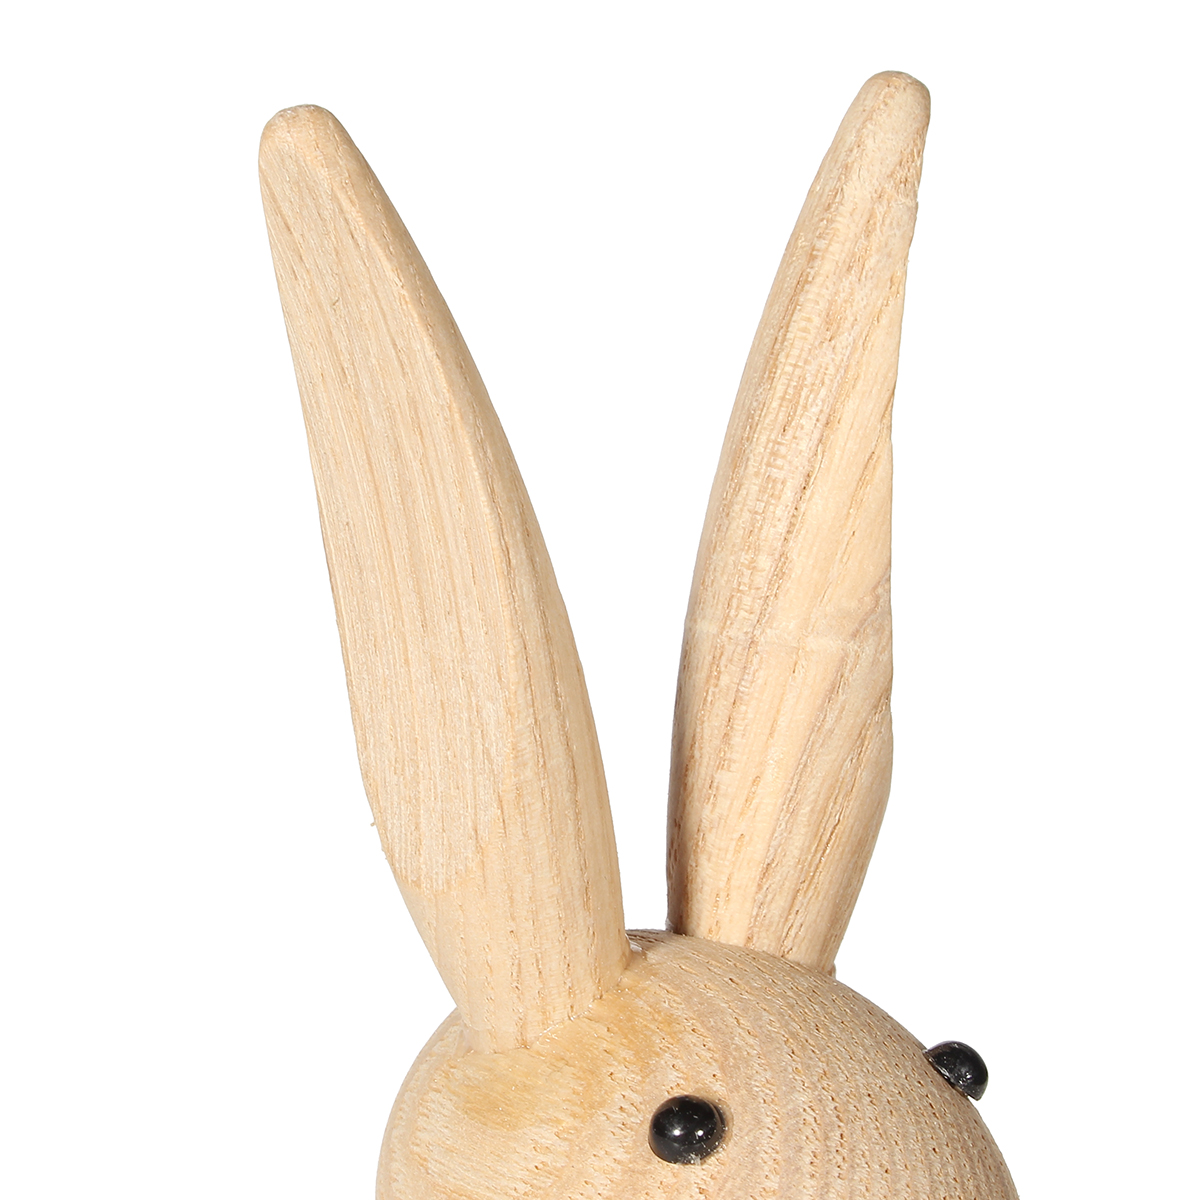 Wood-Carving-Miss-Rabbit-Figurines-Joints-Puppets-Animal-Art-Home-Decoration-Crafts-1241724-9